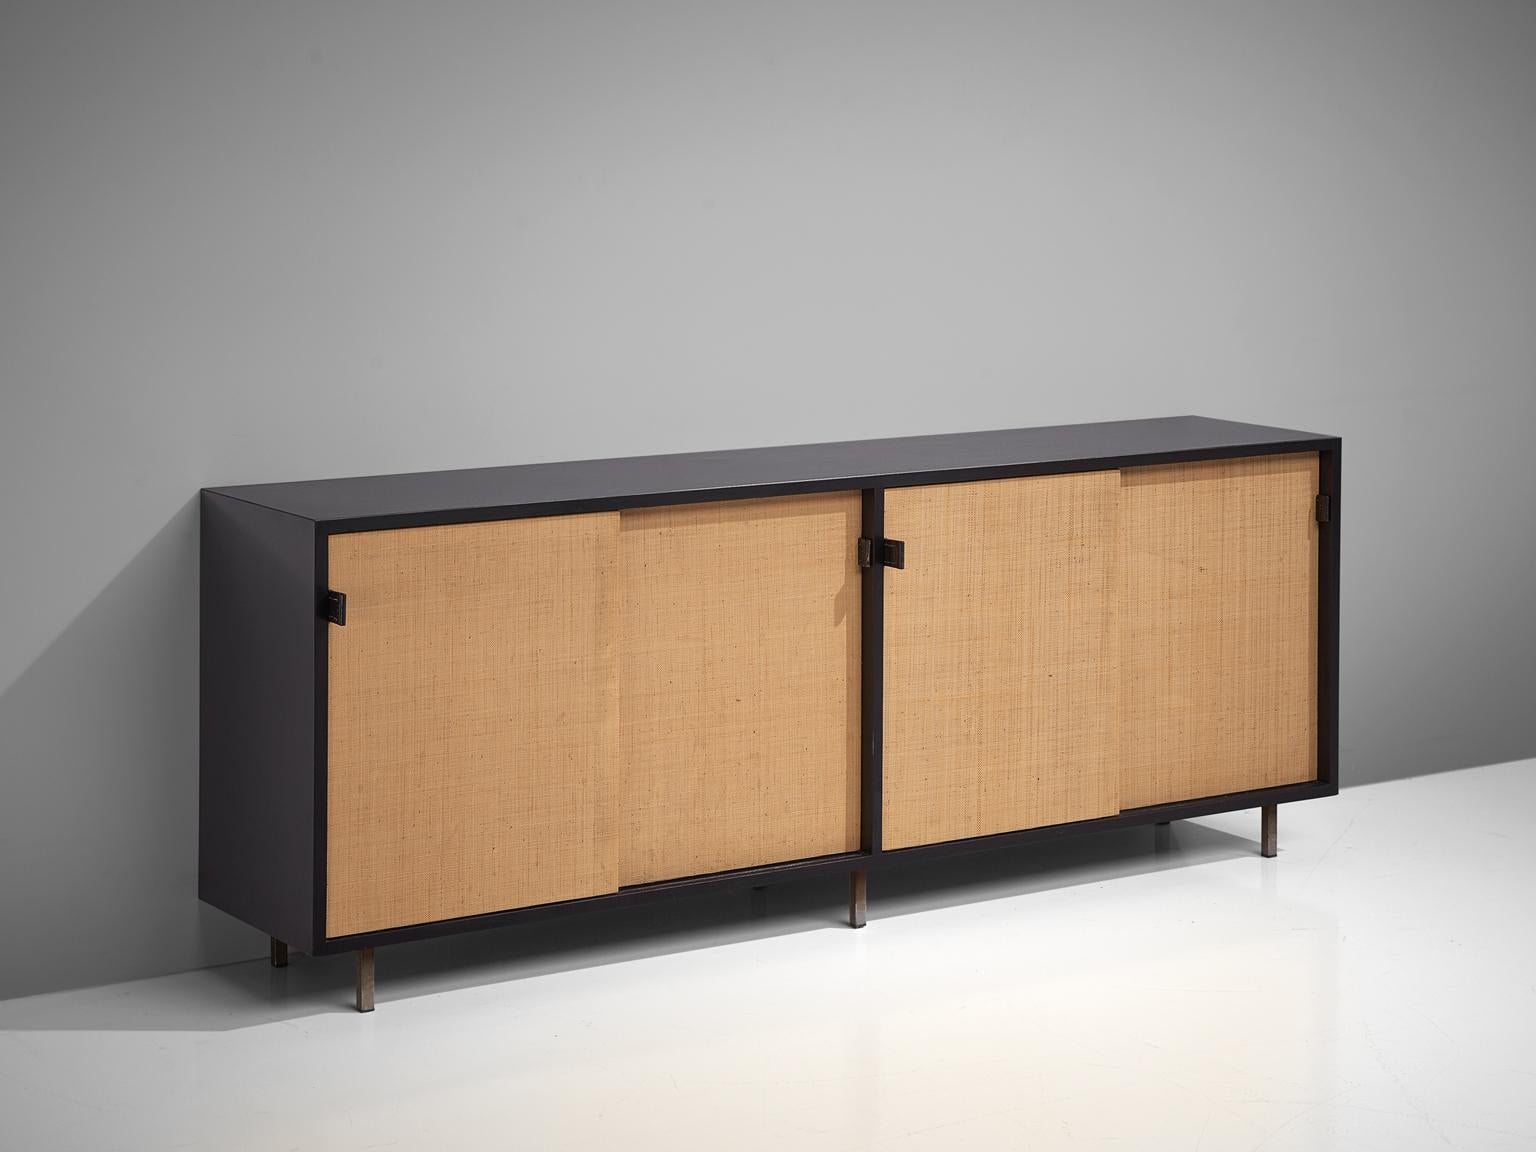 Florence Knoll for Knoll, sideboard, cane, ebonized wood and metal, United States, 1961.

This sideboard is designed by Florence Knoll for Knoll International and was meant for the headquarters of Knoll in Italy. The credenza is executed in two